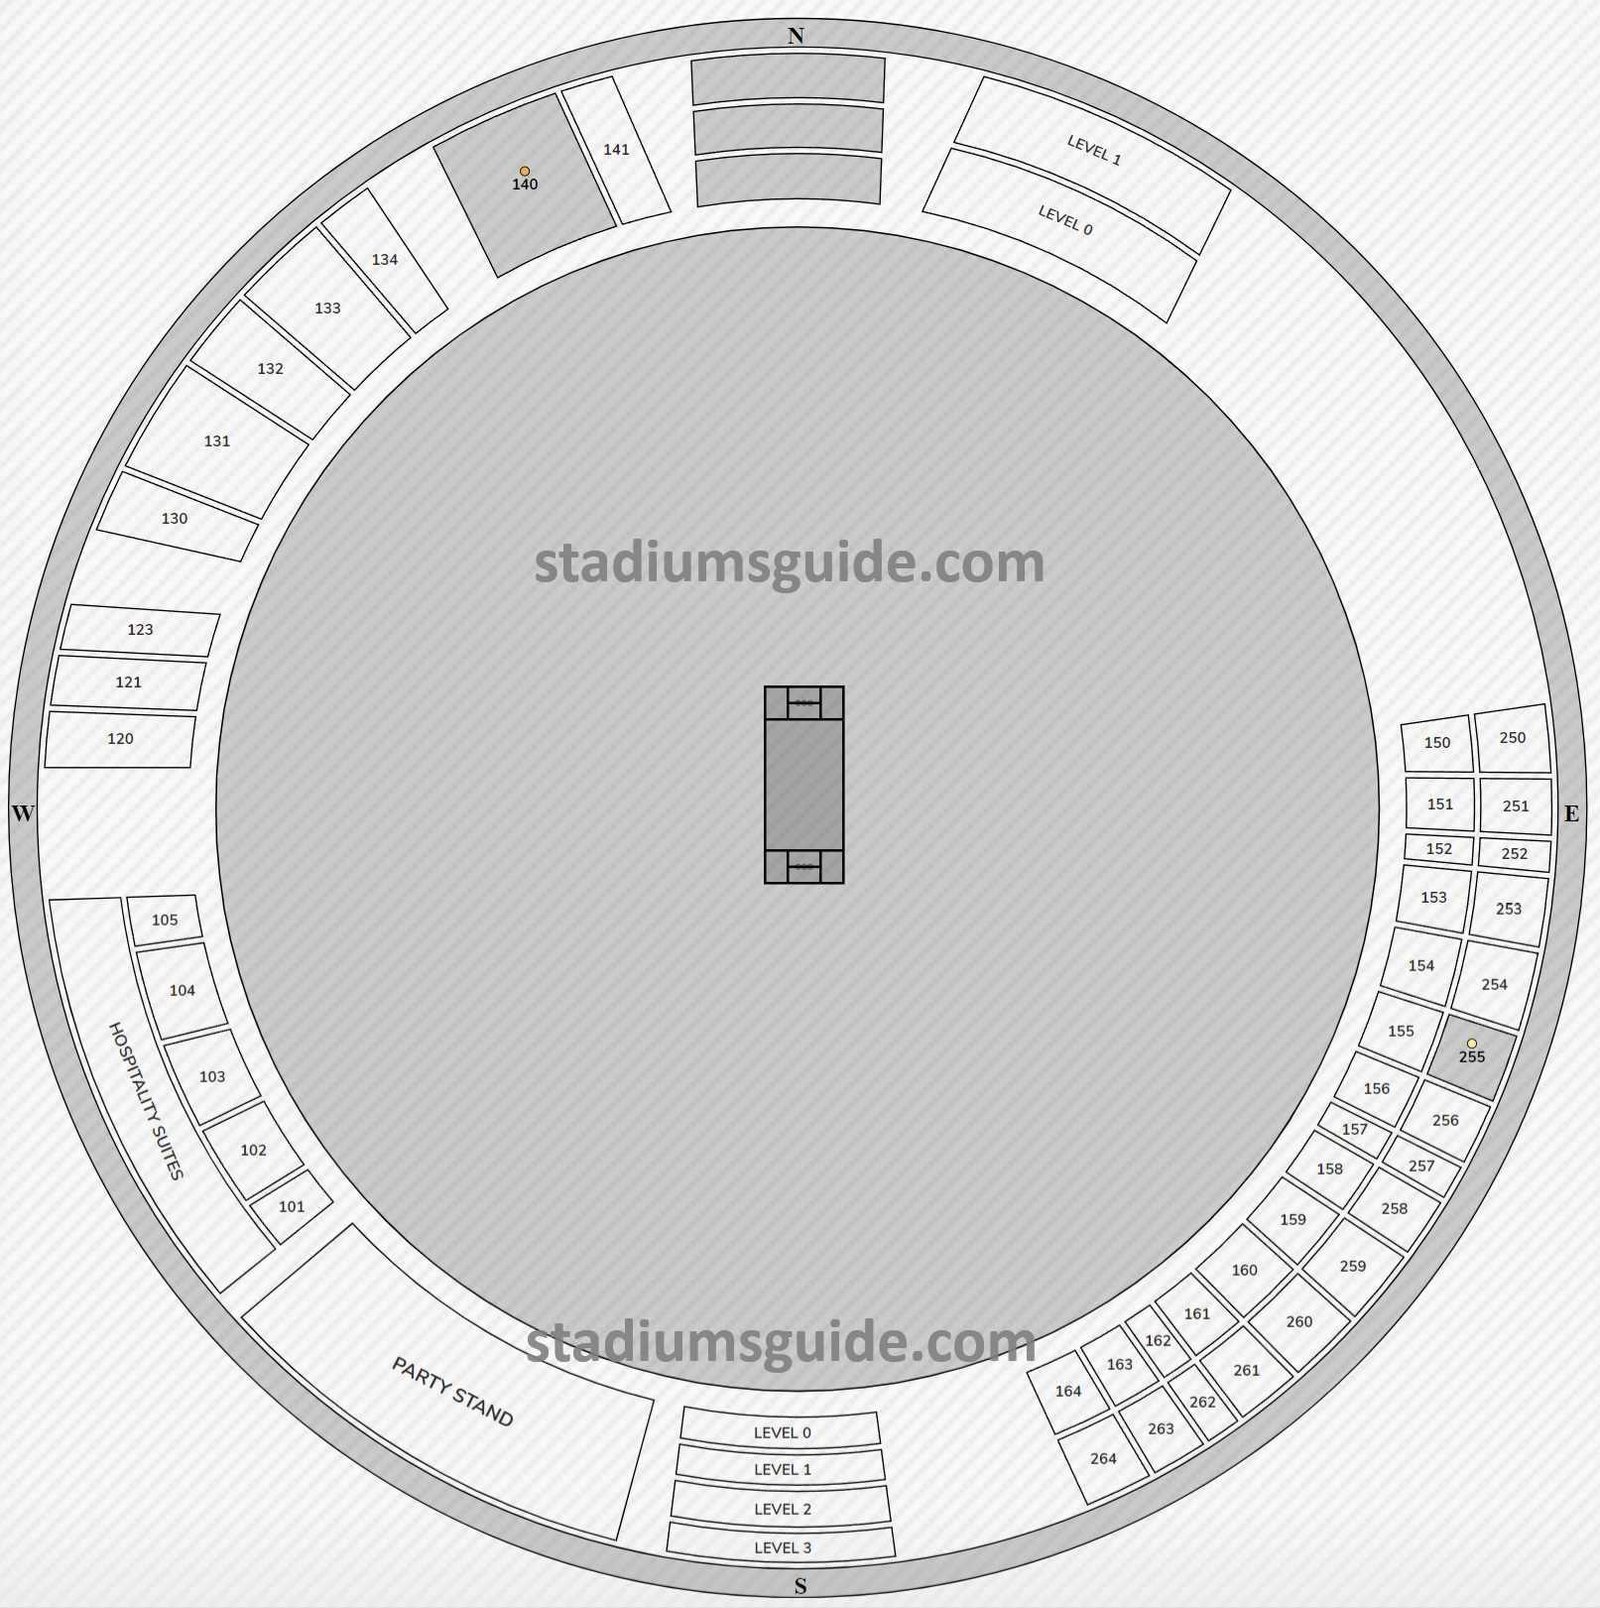 Arnos Vale Stadium Seating Plan with Seat Numbers and Rows